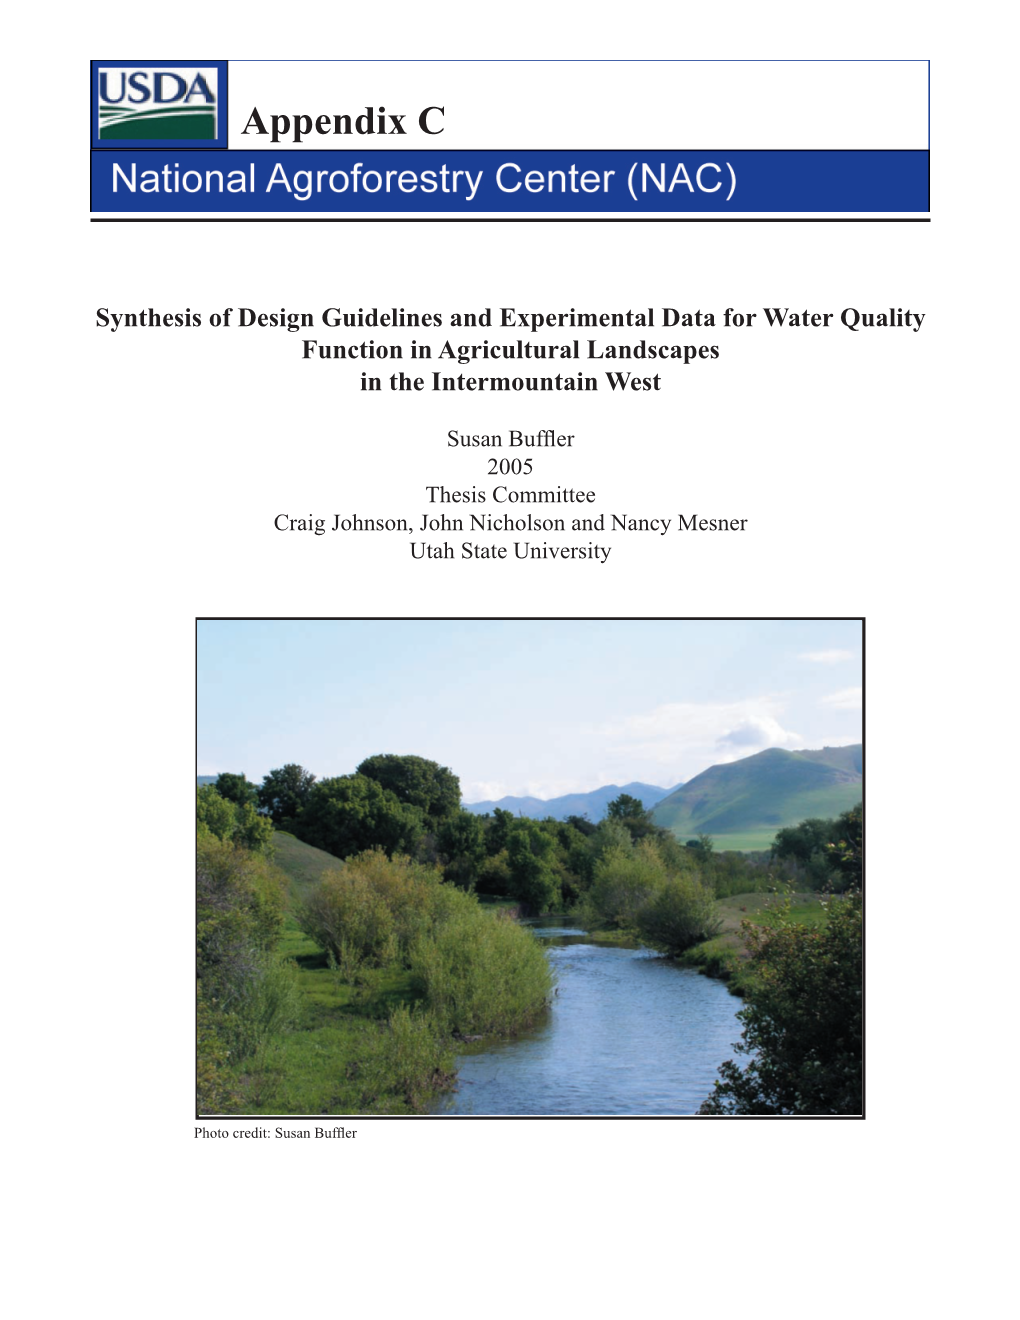 Riparian Buffer Design Guidelines for Water Quality and Wildlife Habitat Functions on Lim, T.T., D.R